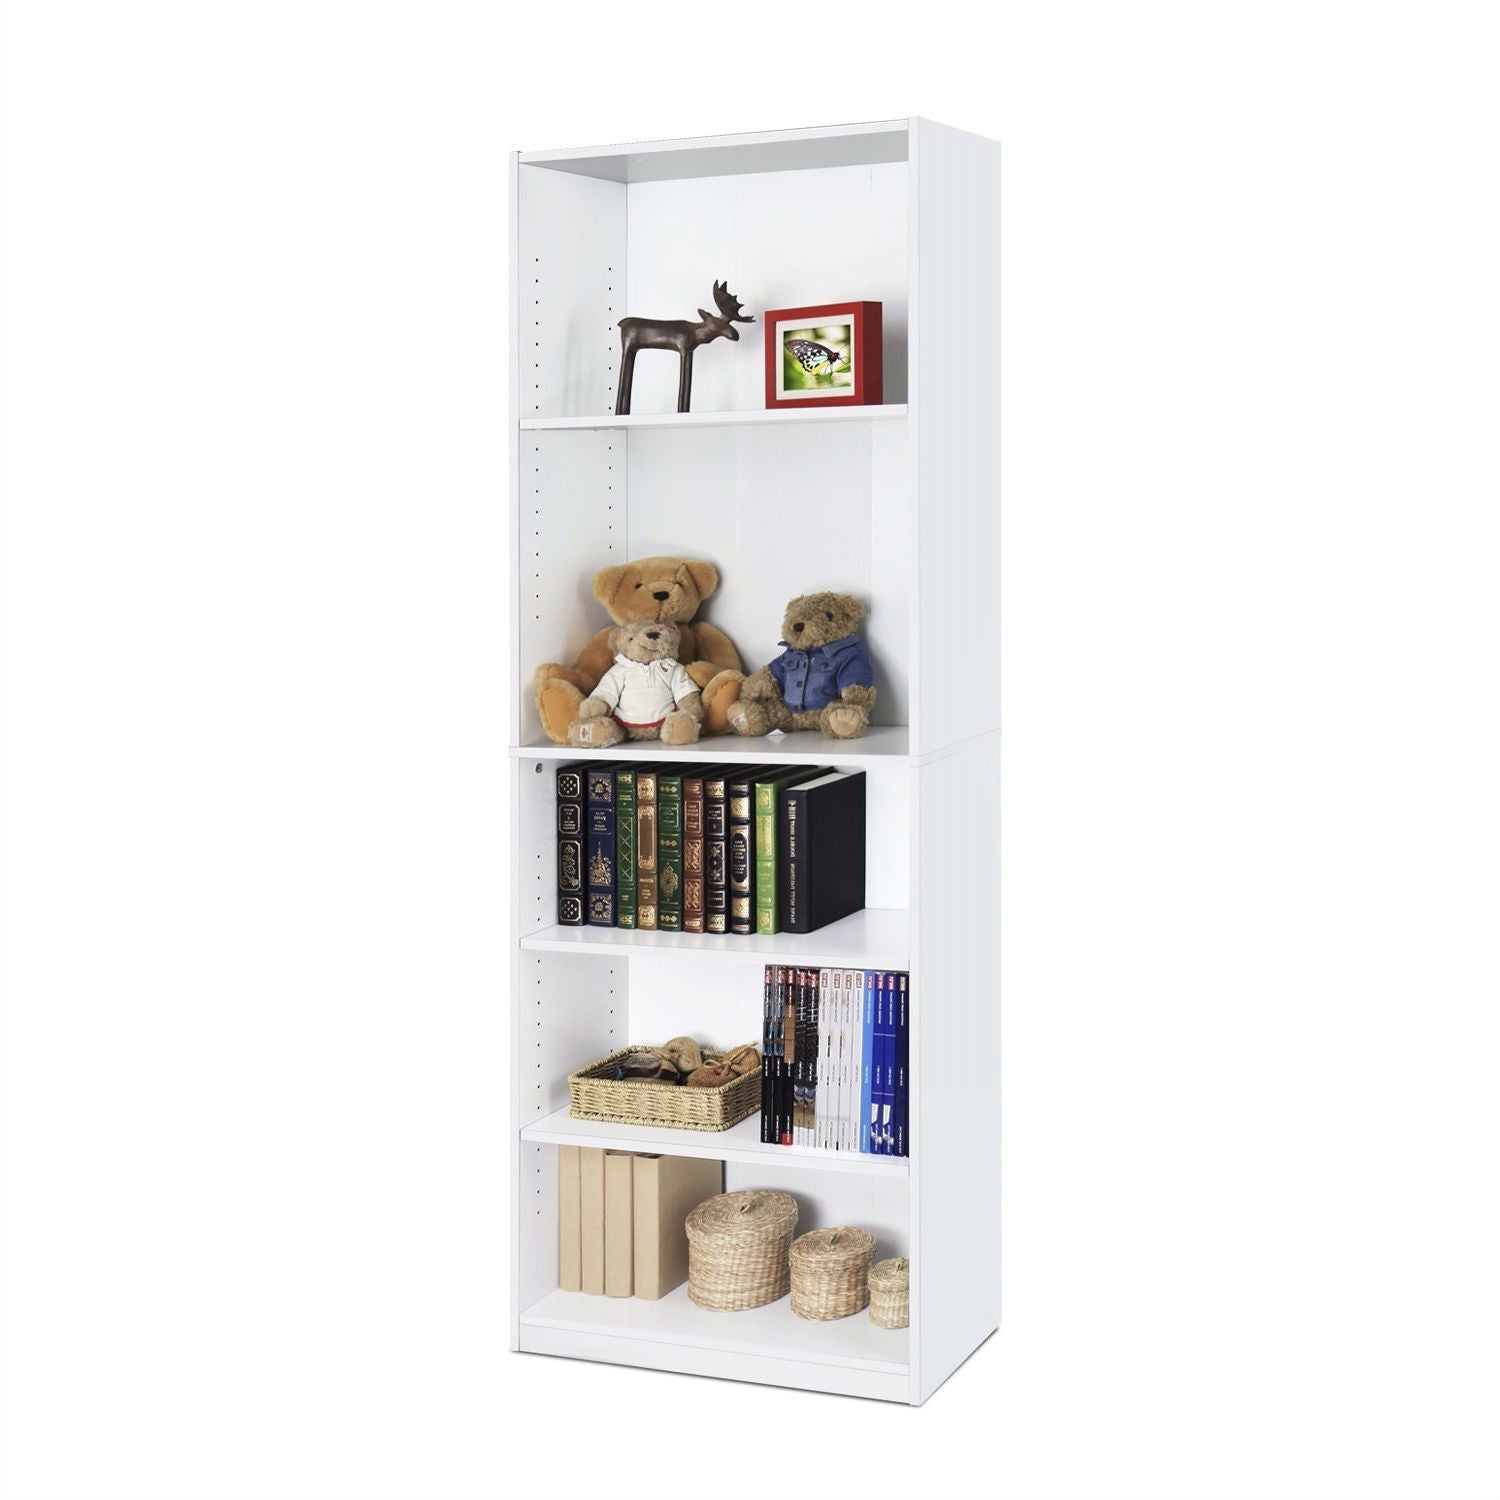 Living Room > Bookcases - Modern 5-Shelf Bookcase In White Wood Finish